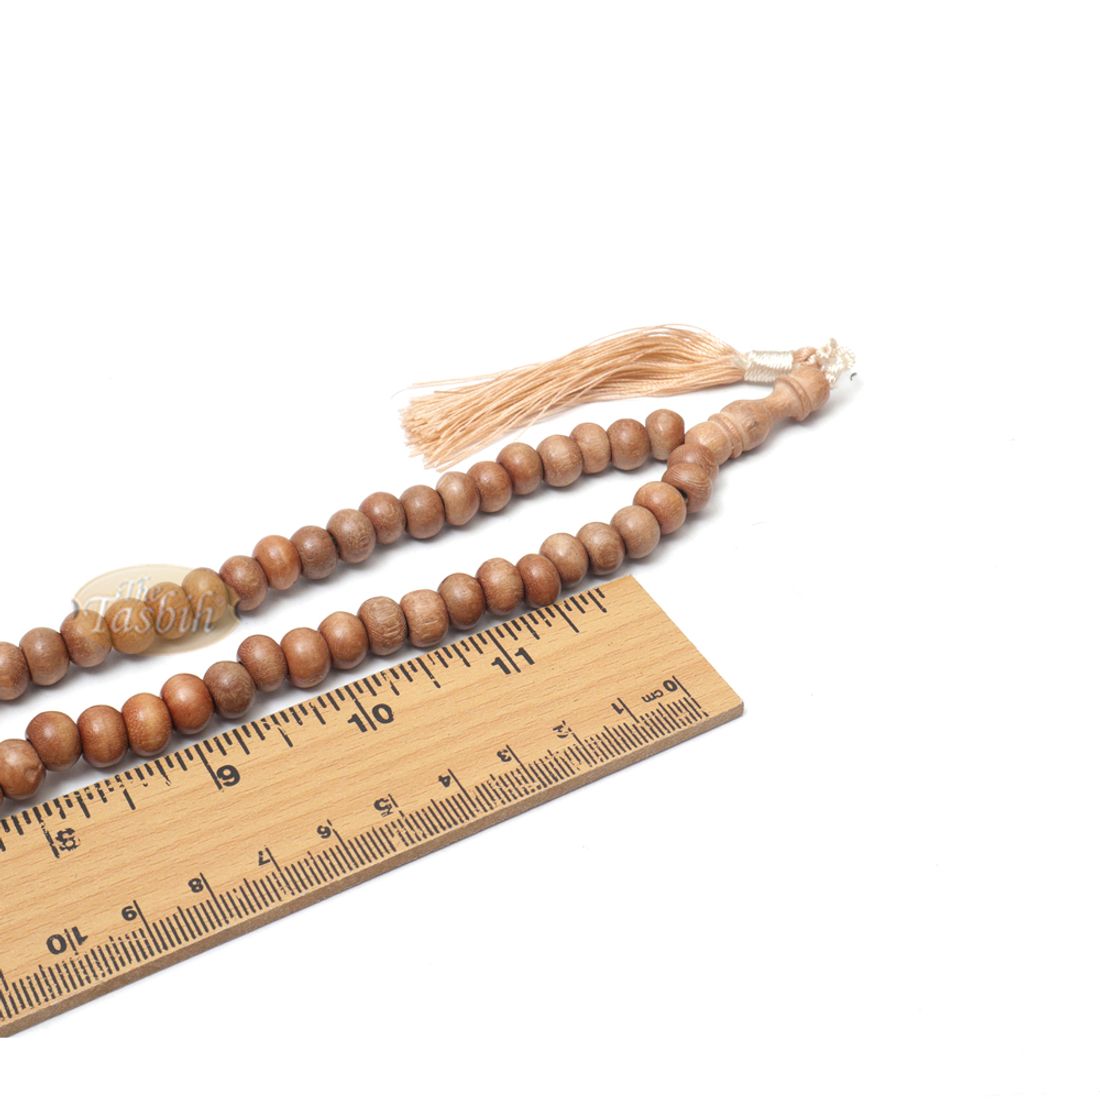 Low-price Handcrafted Brown Rustic Coffee Wood Tasbih Prayer Beads With Strong Soft Tassels